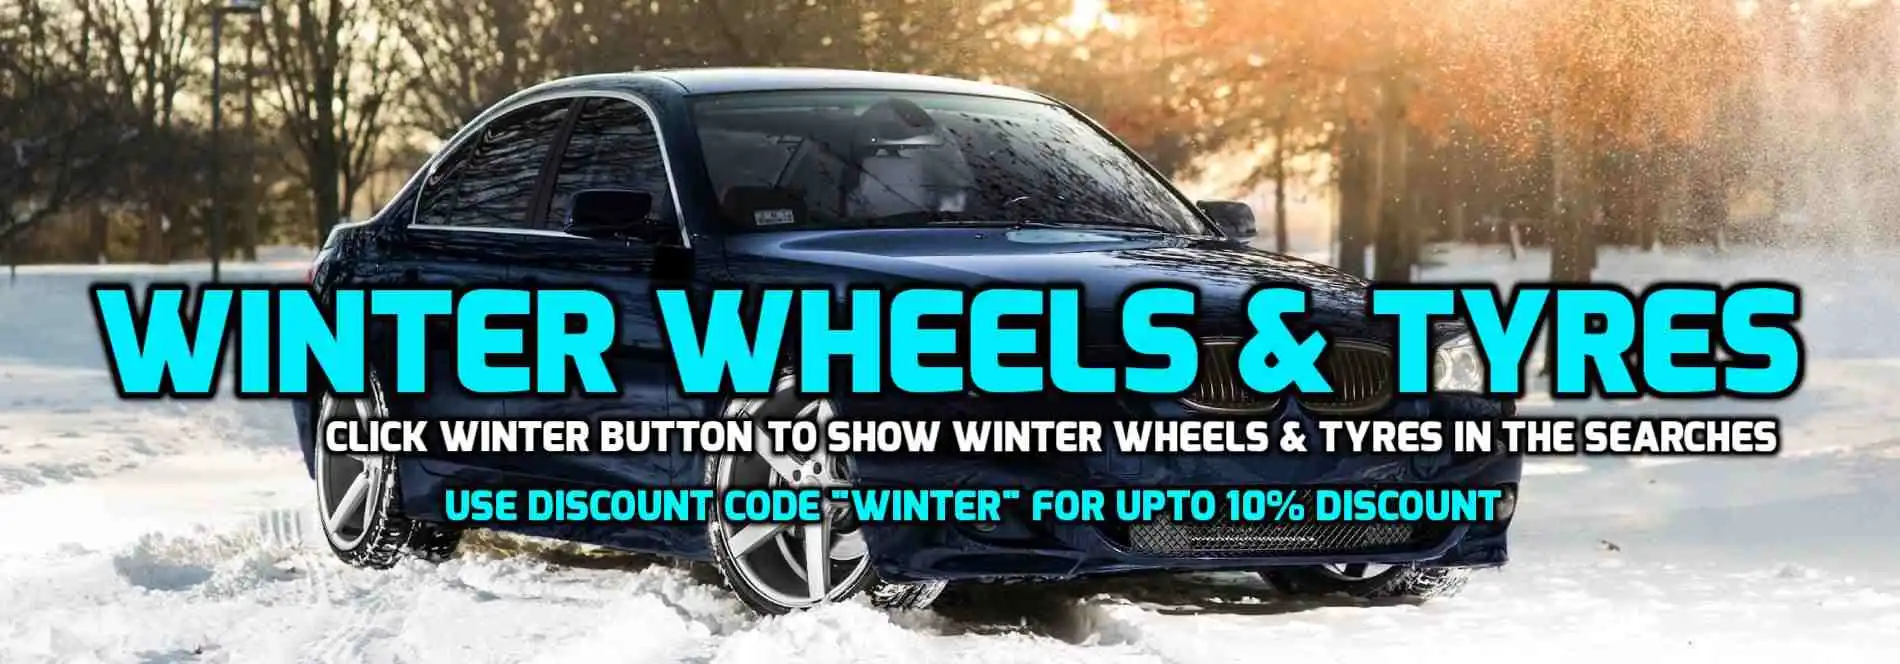 Winter Wheels and Tyres